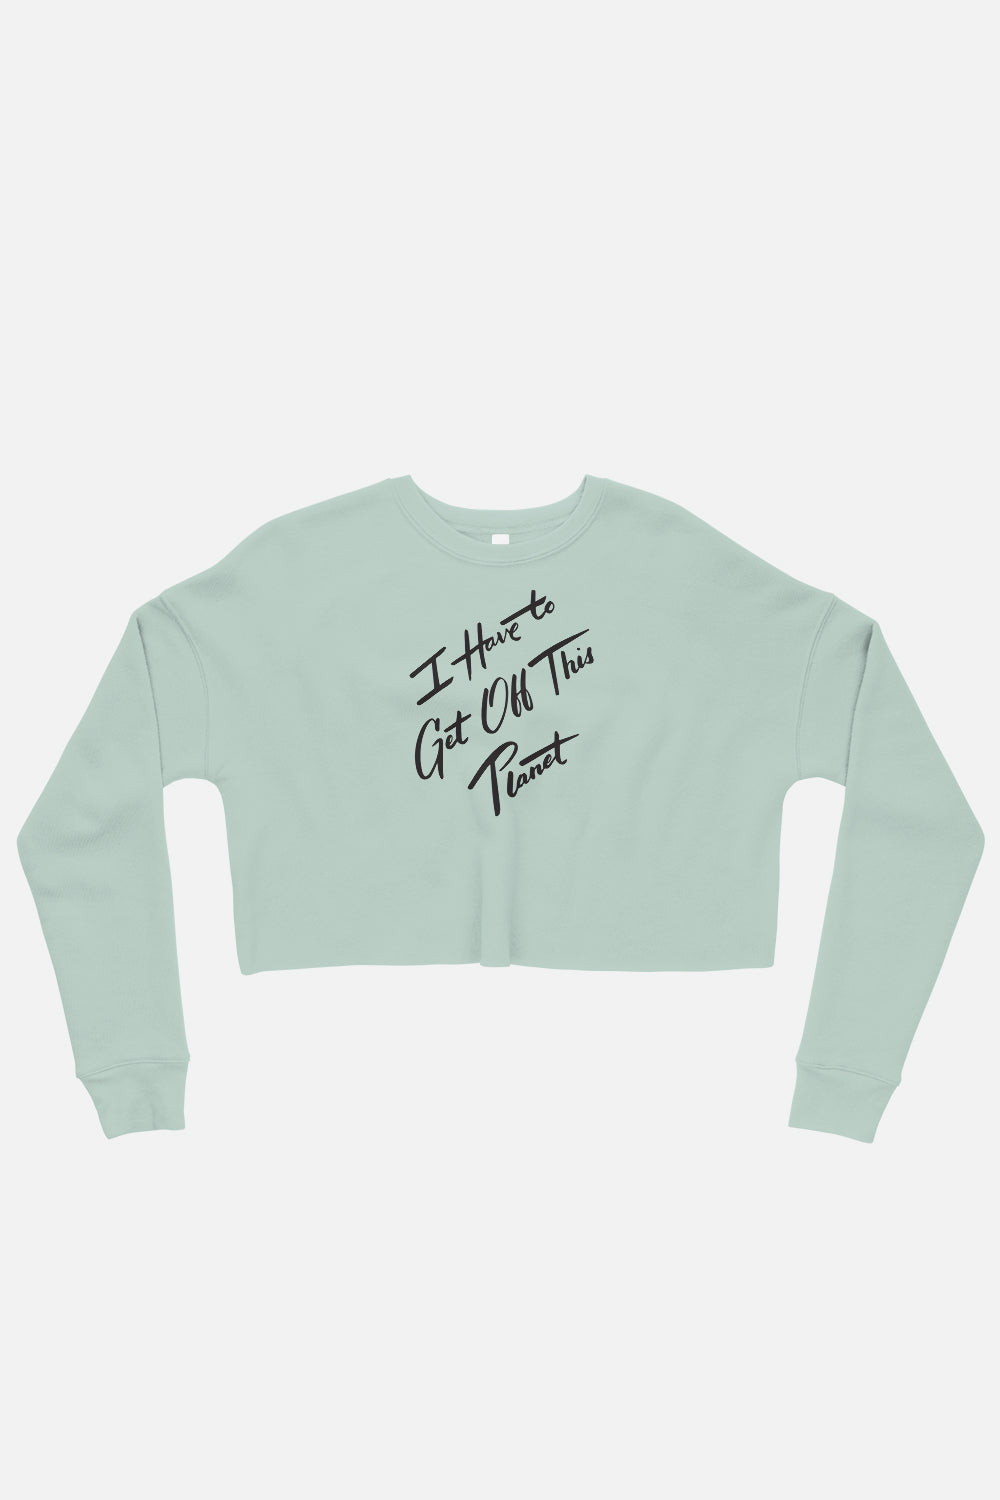 I Have to Get Off This Planet Fitted Crop Sweatshirt